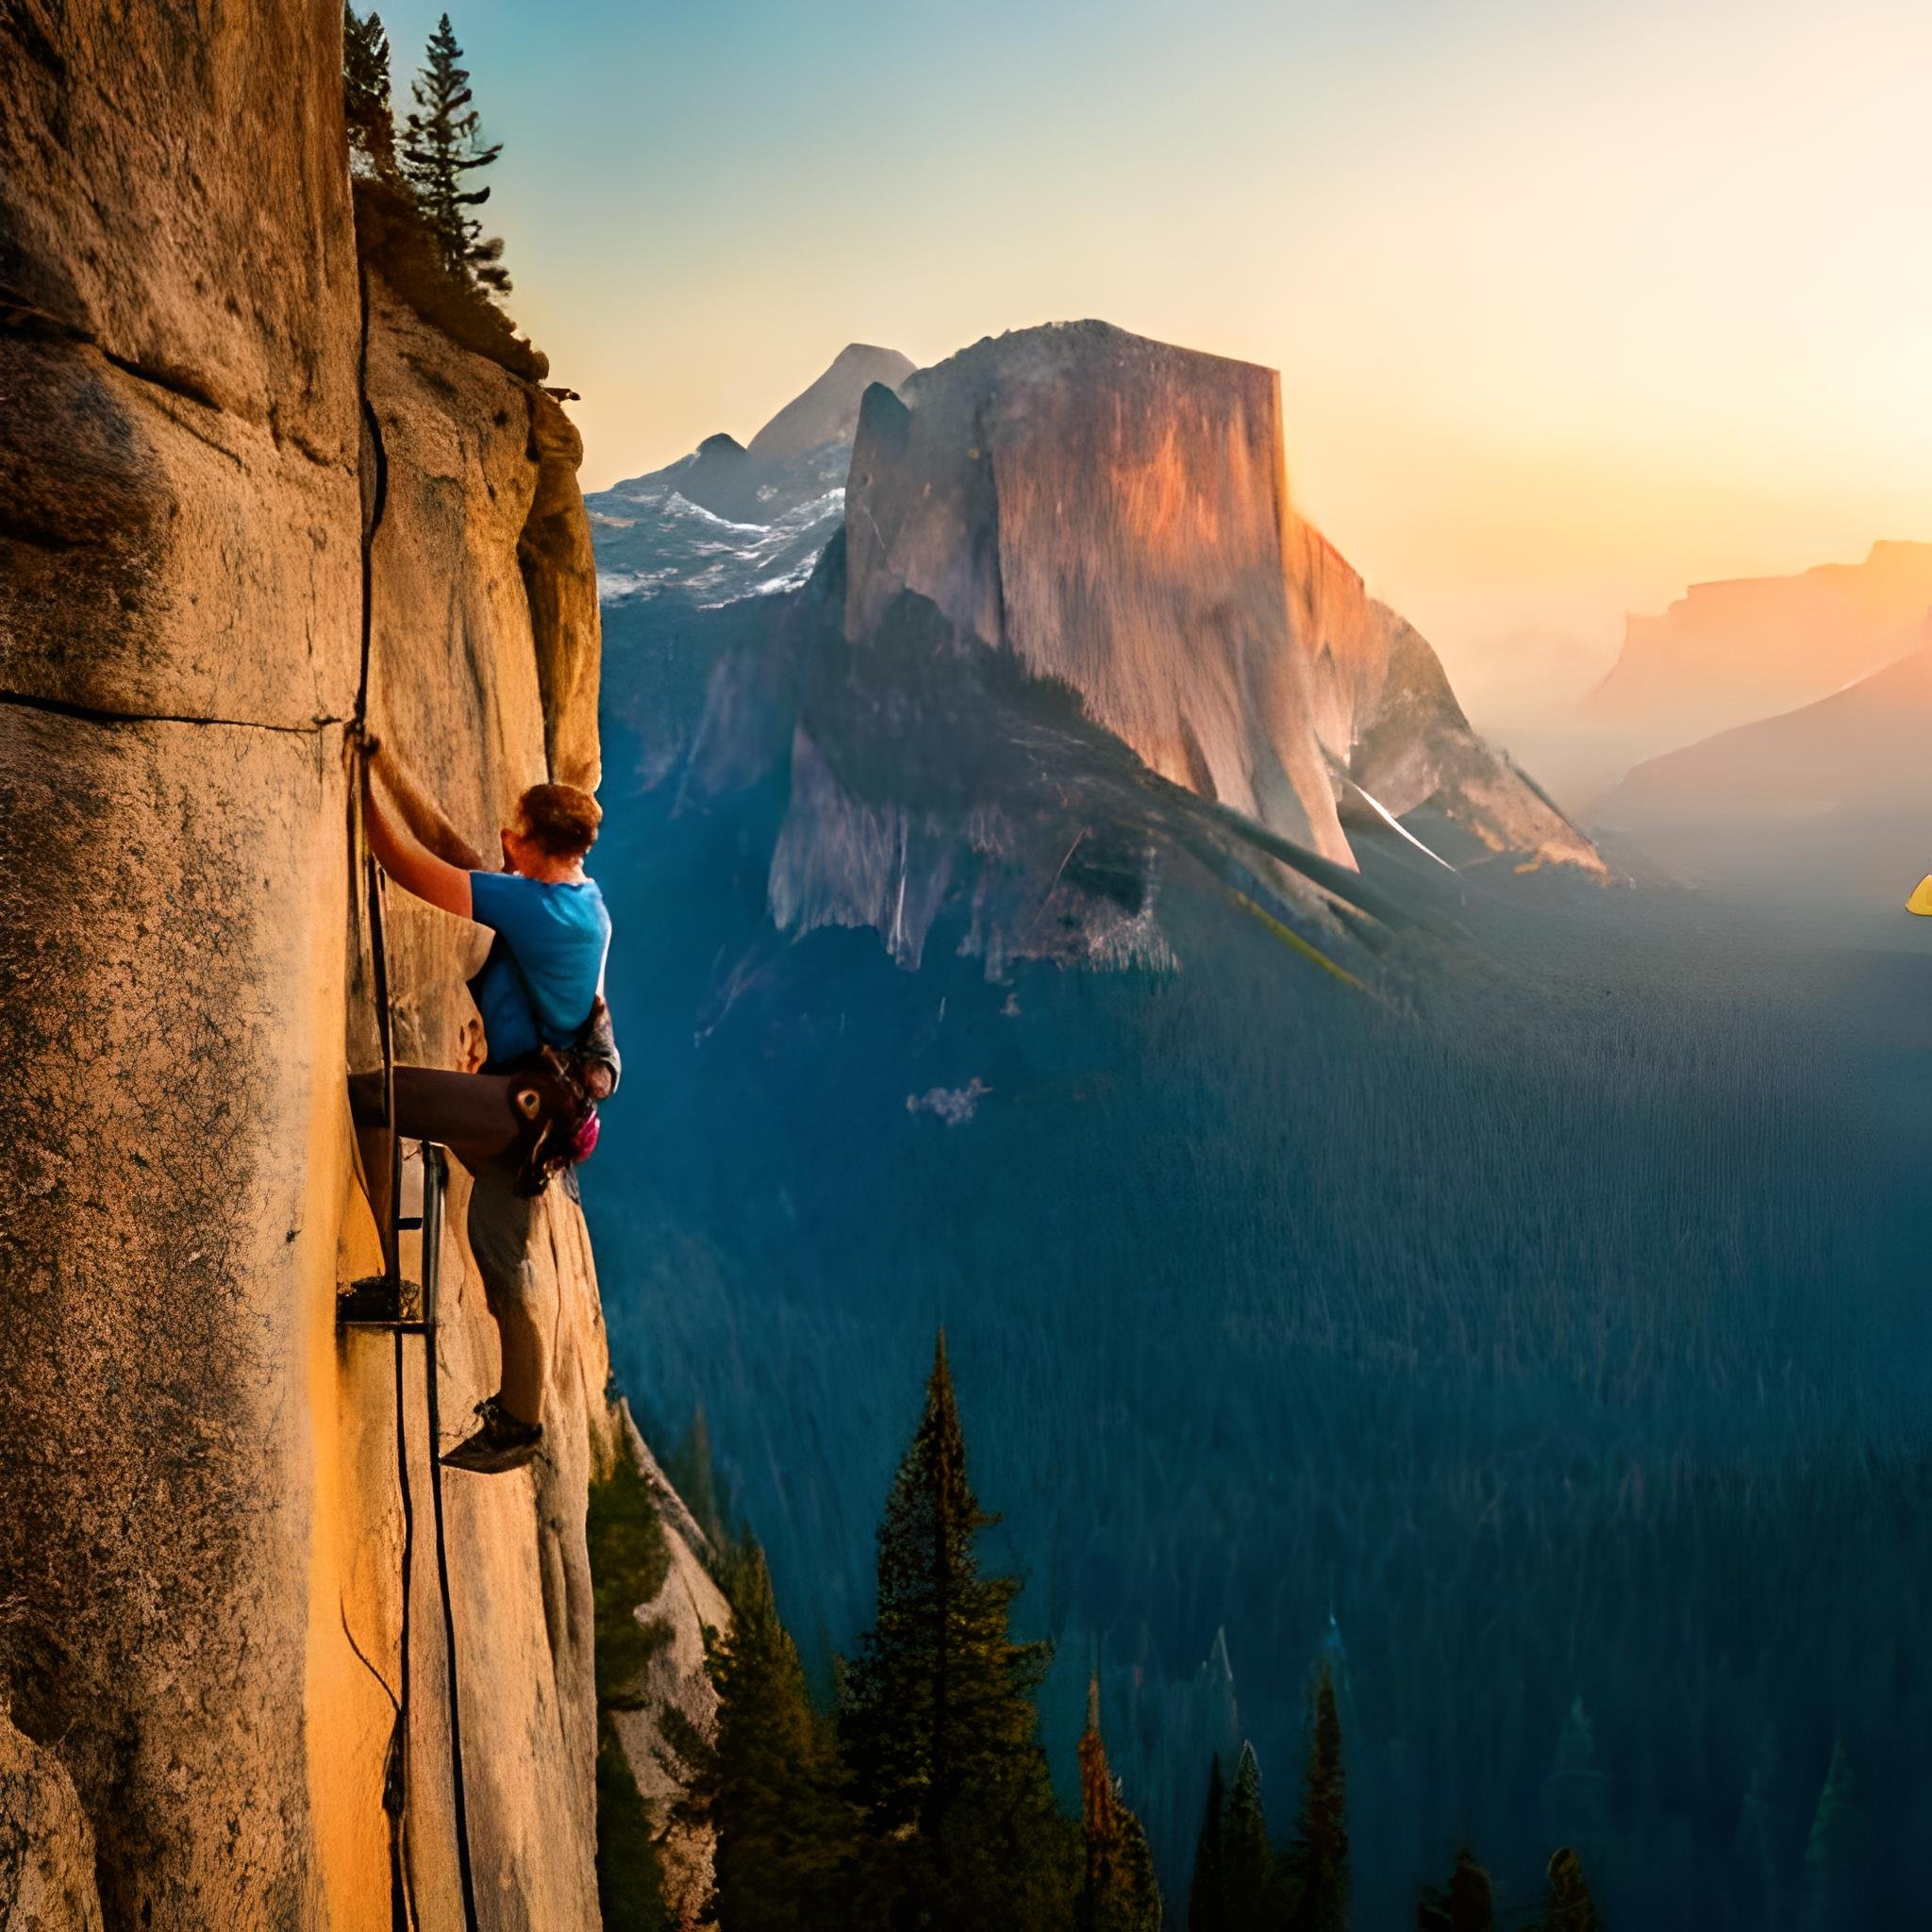 Rock climbing is the perfect adventure for those who love physical and mental challenges. Scale towering cliffs in Yosemite National Park, navigate the rugged peaks of the Dolomites in Italy or conquer the iconic El Capitan. Rock climbing pushes your limits and rewards you with breathtaking views from incredible viewpoints.